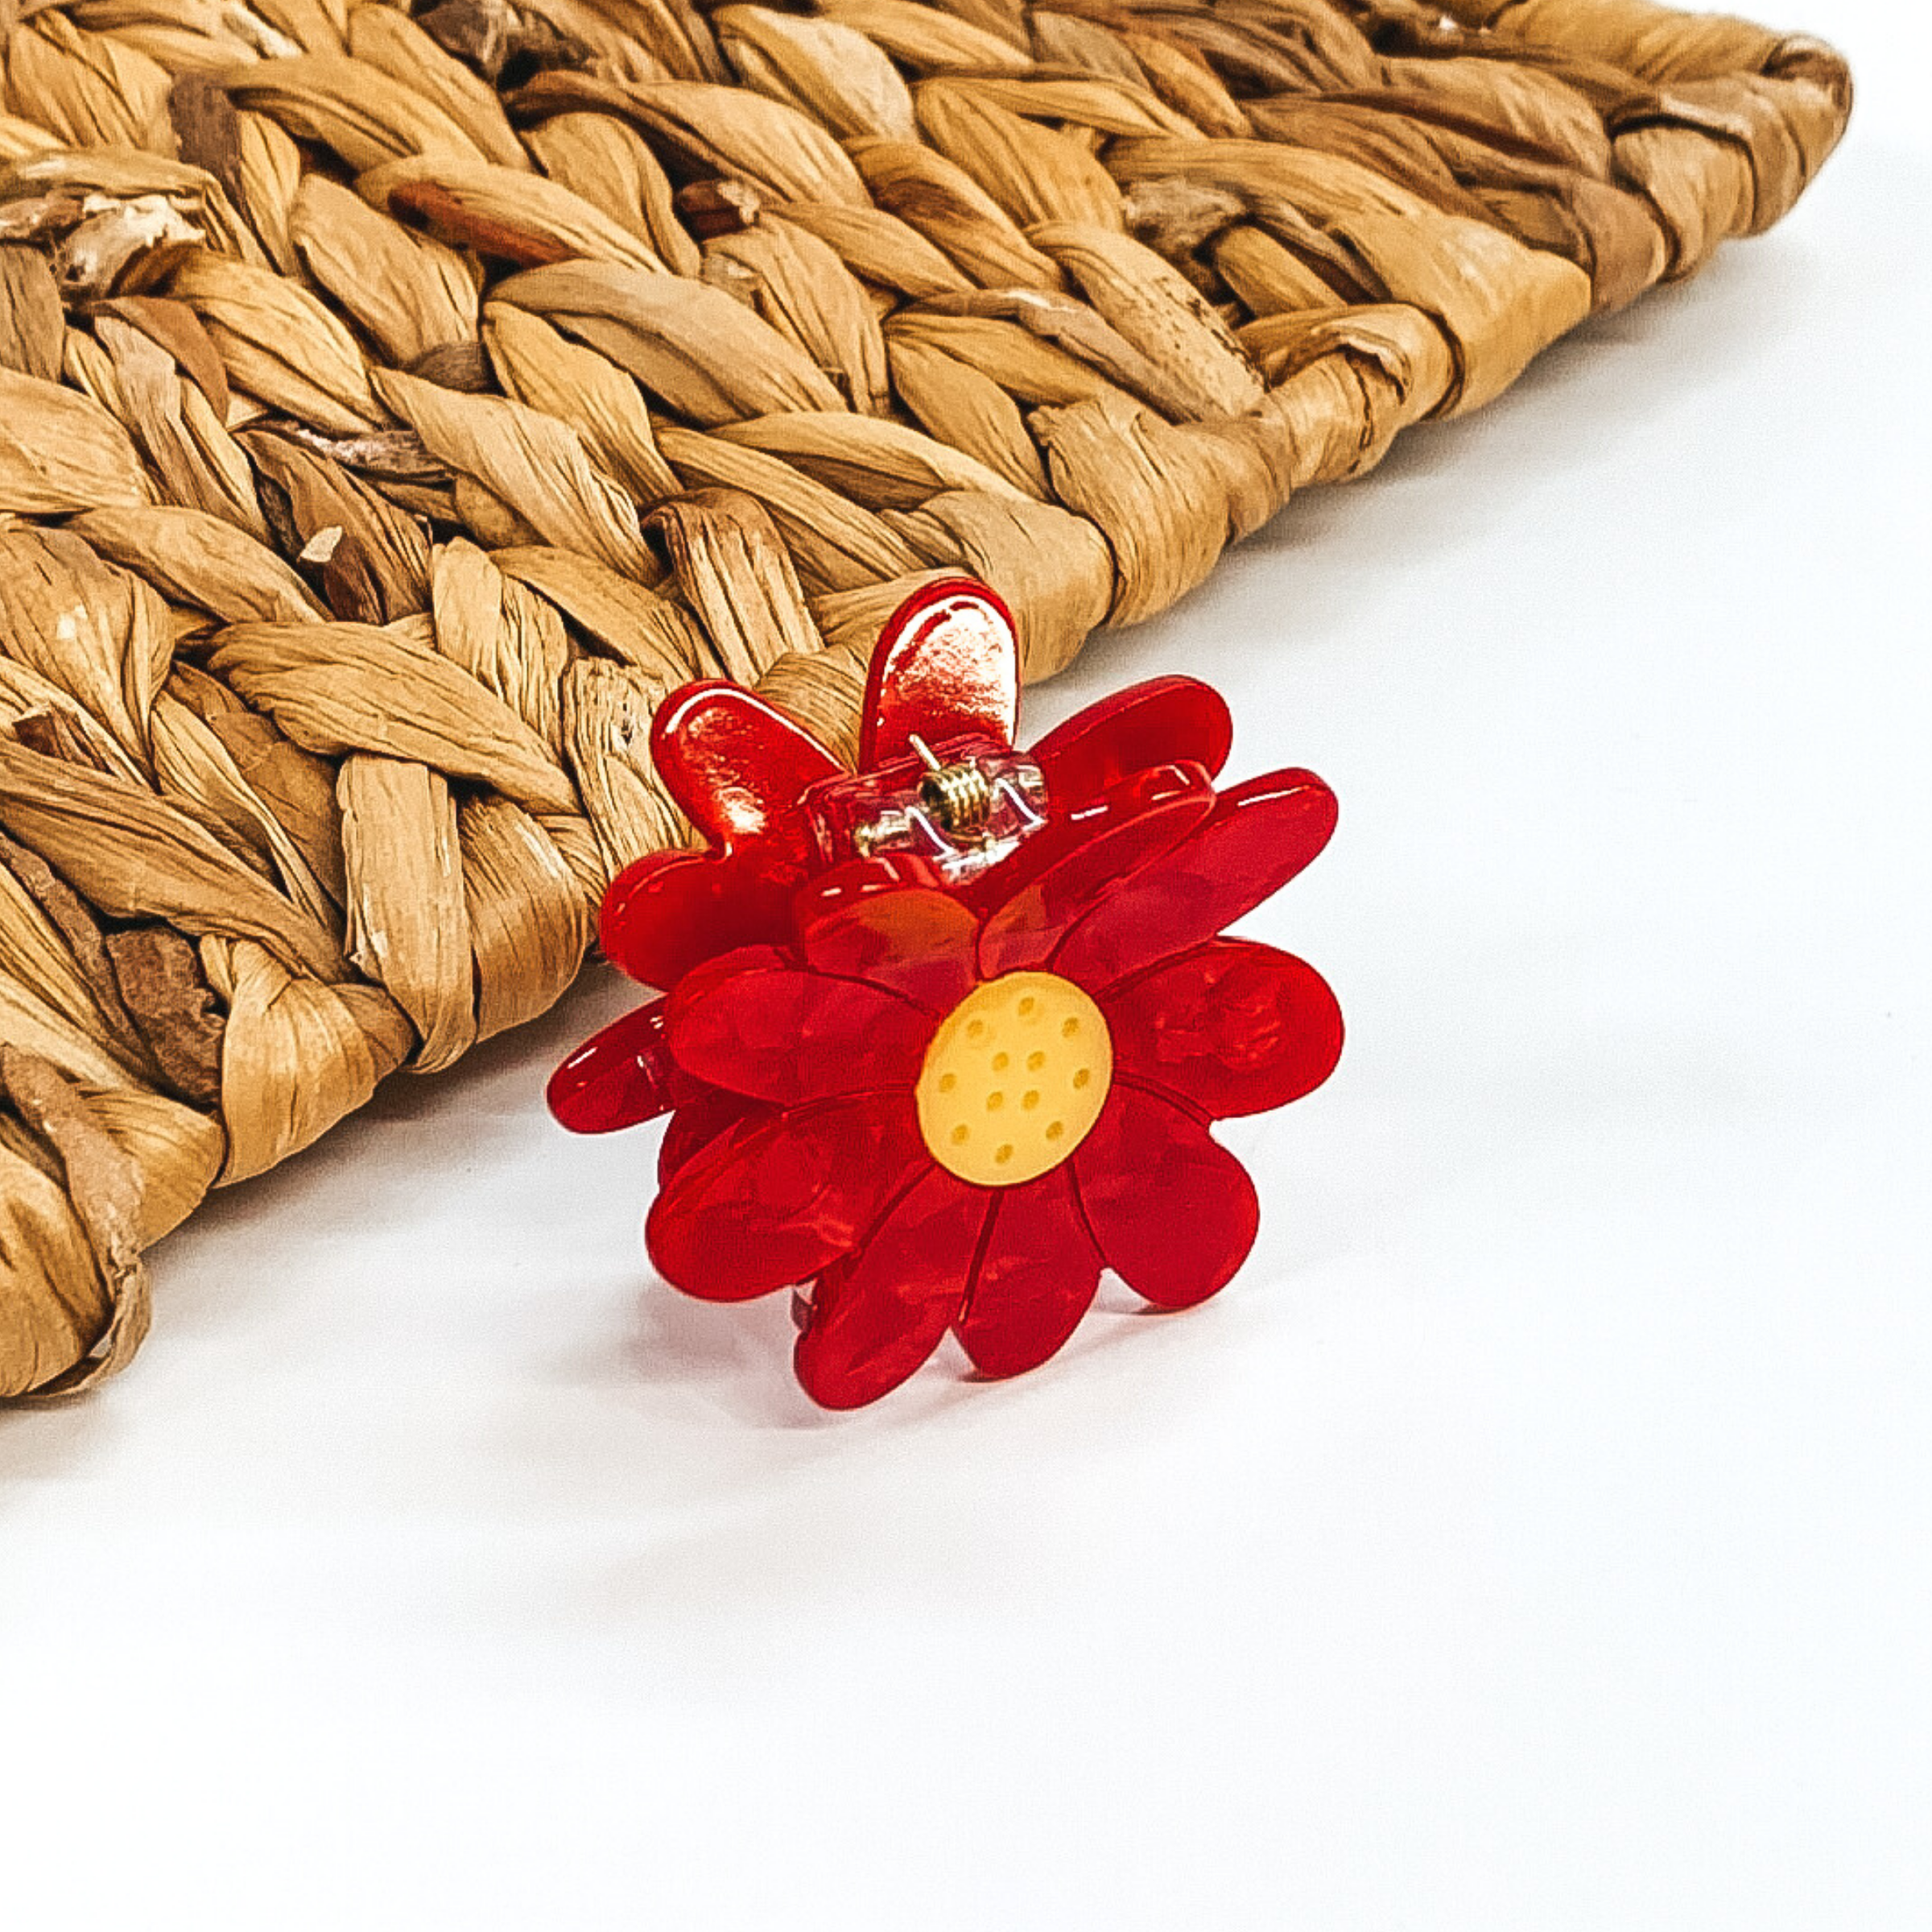 Flower shaped clip in red with a yellow center. This clip is pictured on a white background with a basket weave behind the clip.